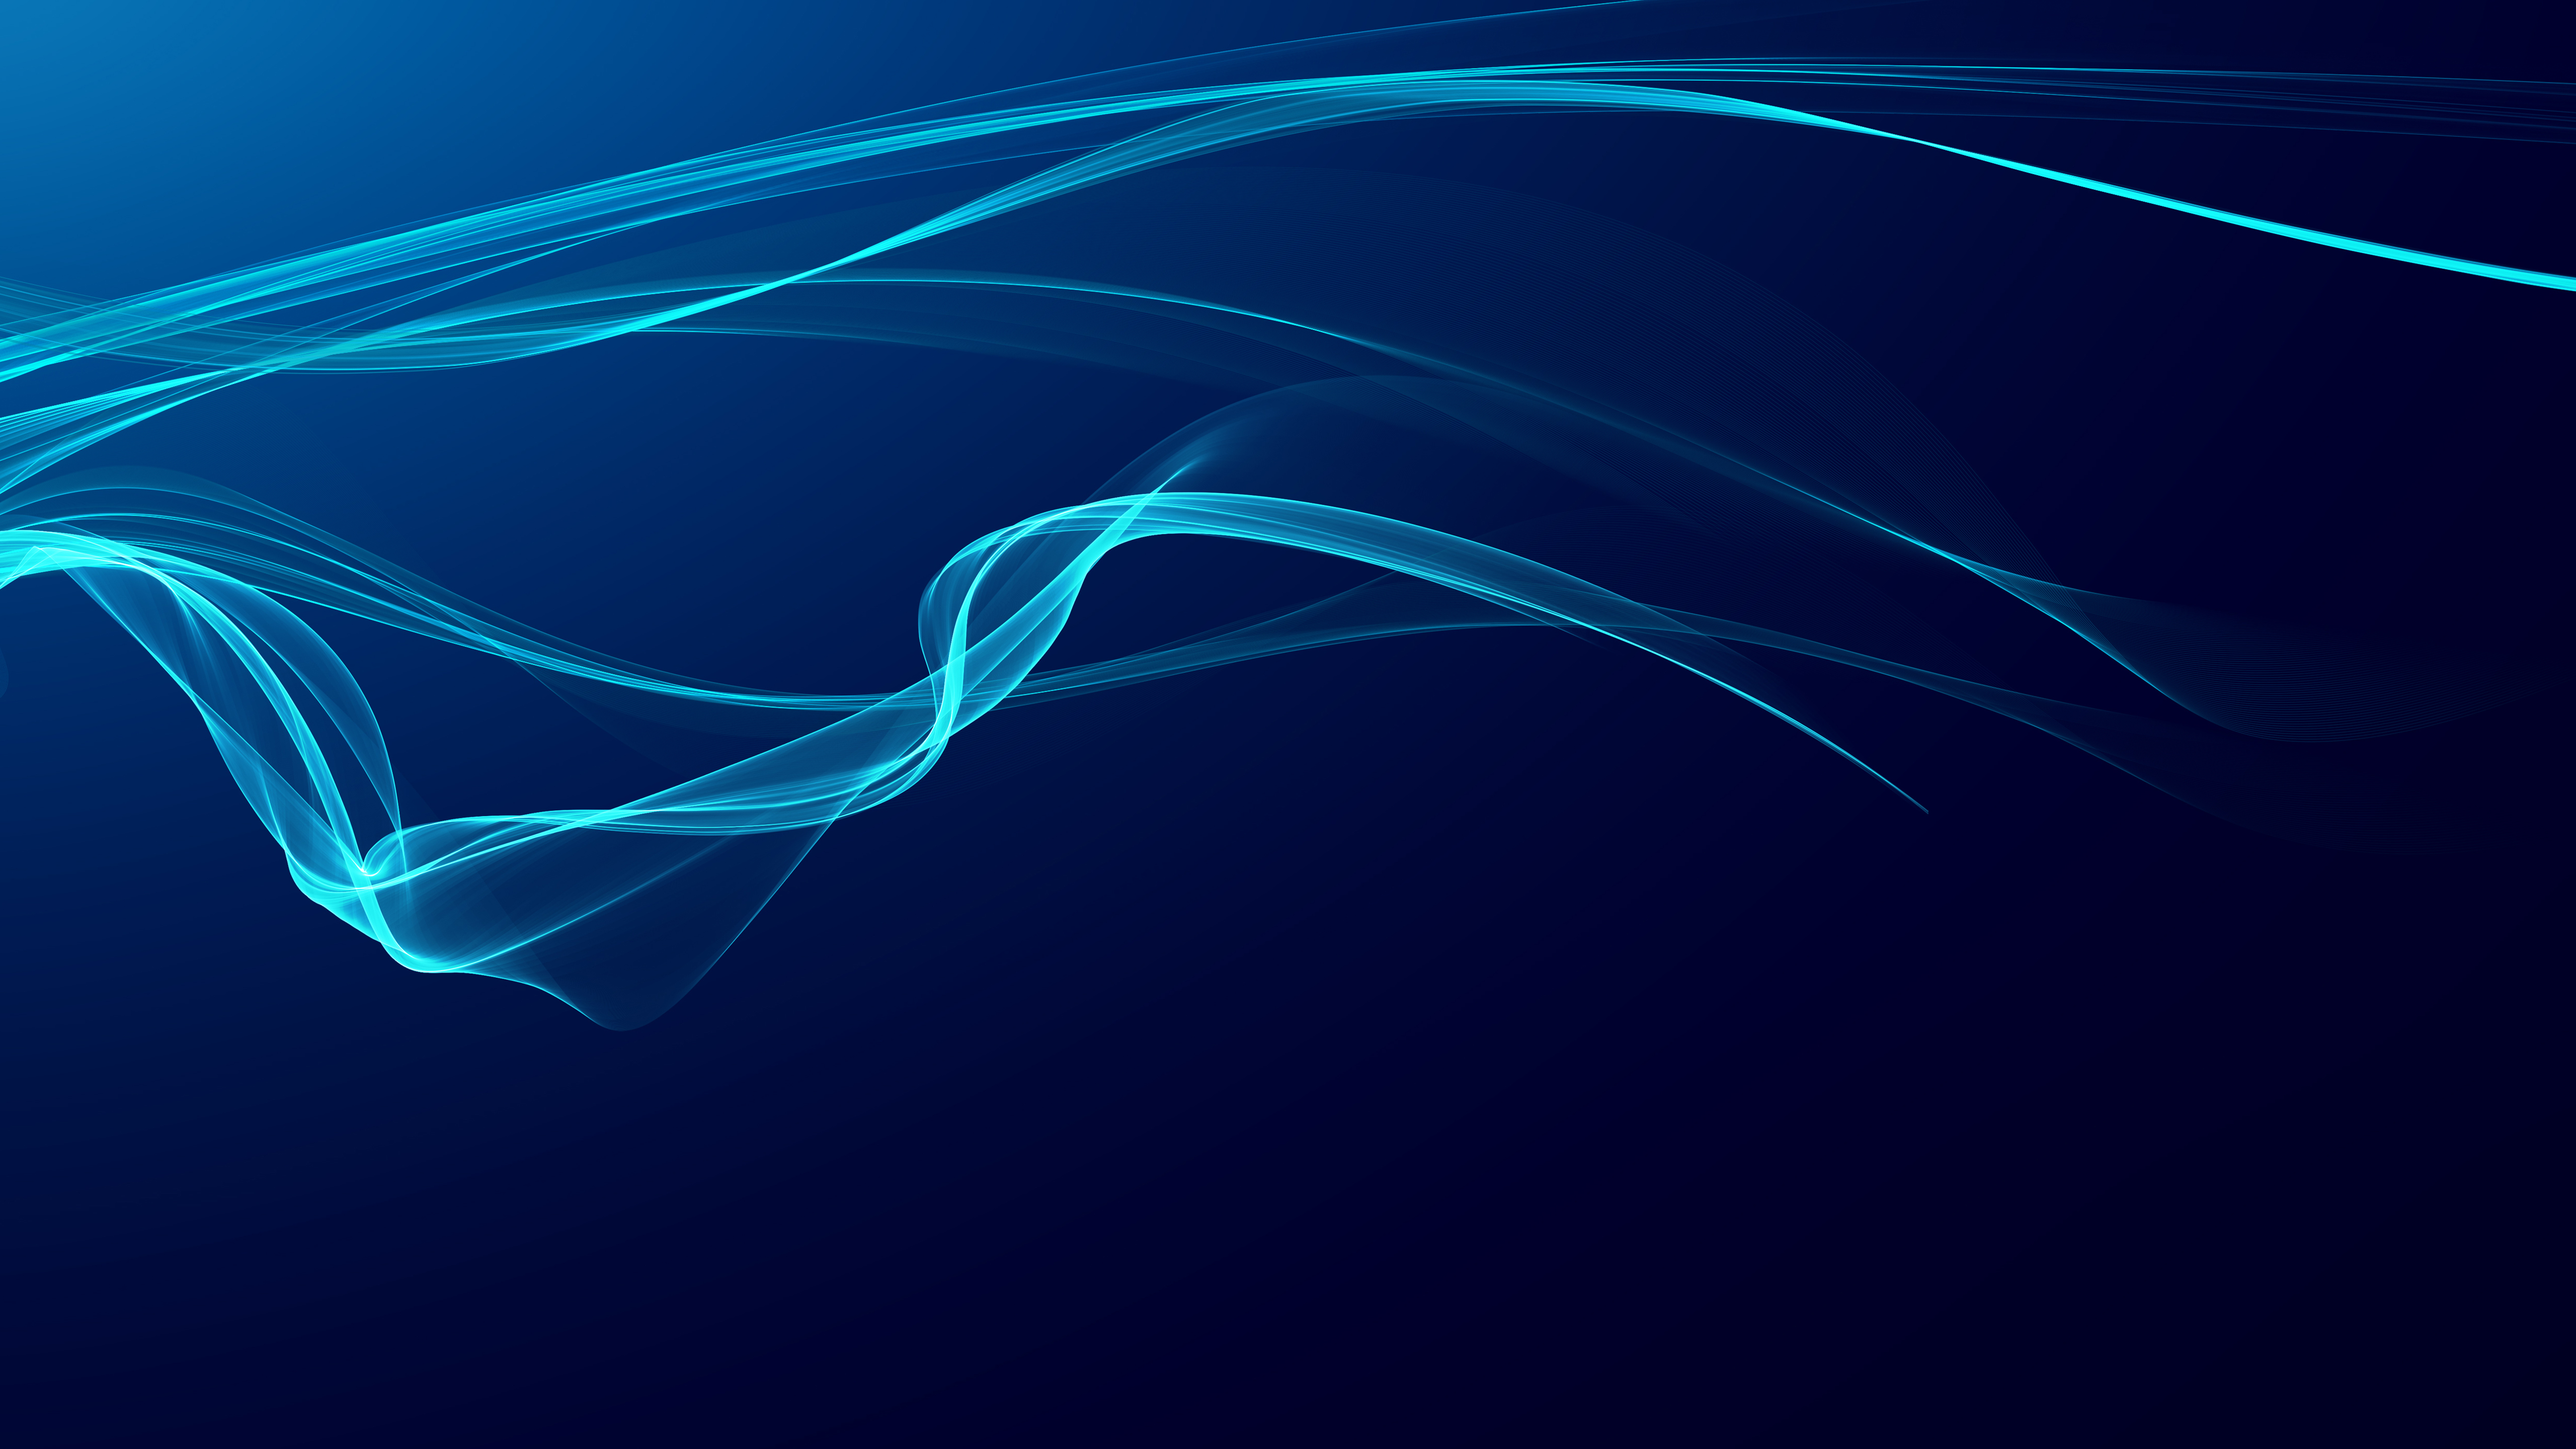 Abstract Wavy Lines Blue 5120x2880